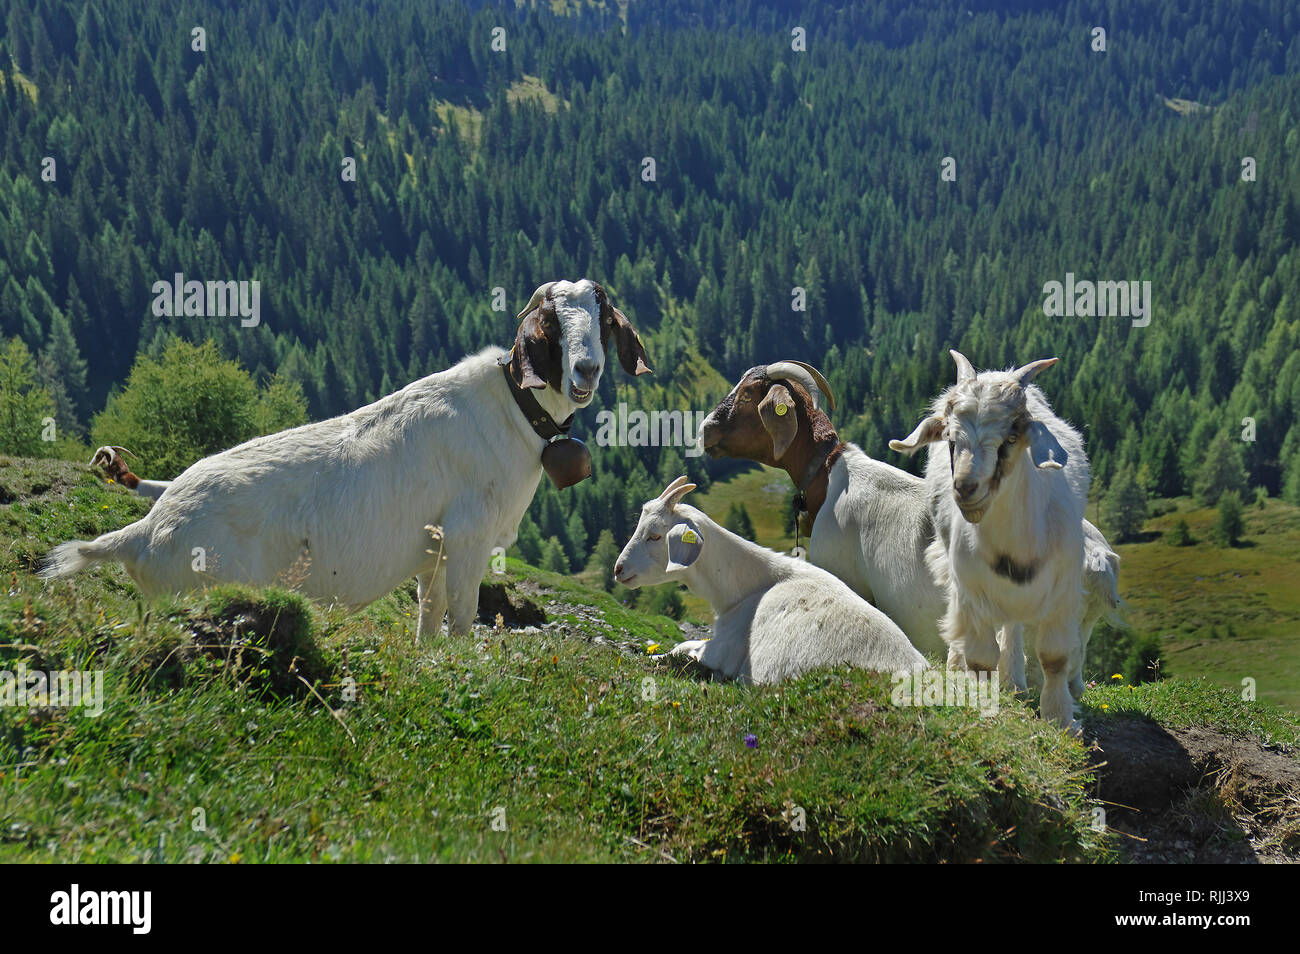 Domestic Goat. Adult Saanen Goats and Boer Goats lying and standing. Dolomites, South Tyrol, Italy Stock Photo